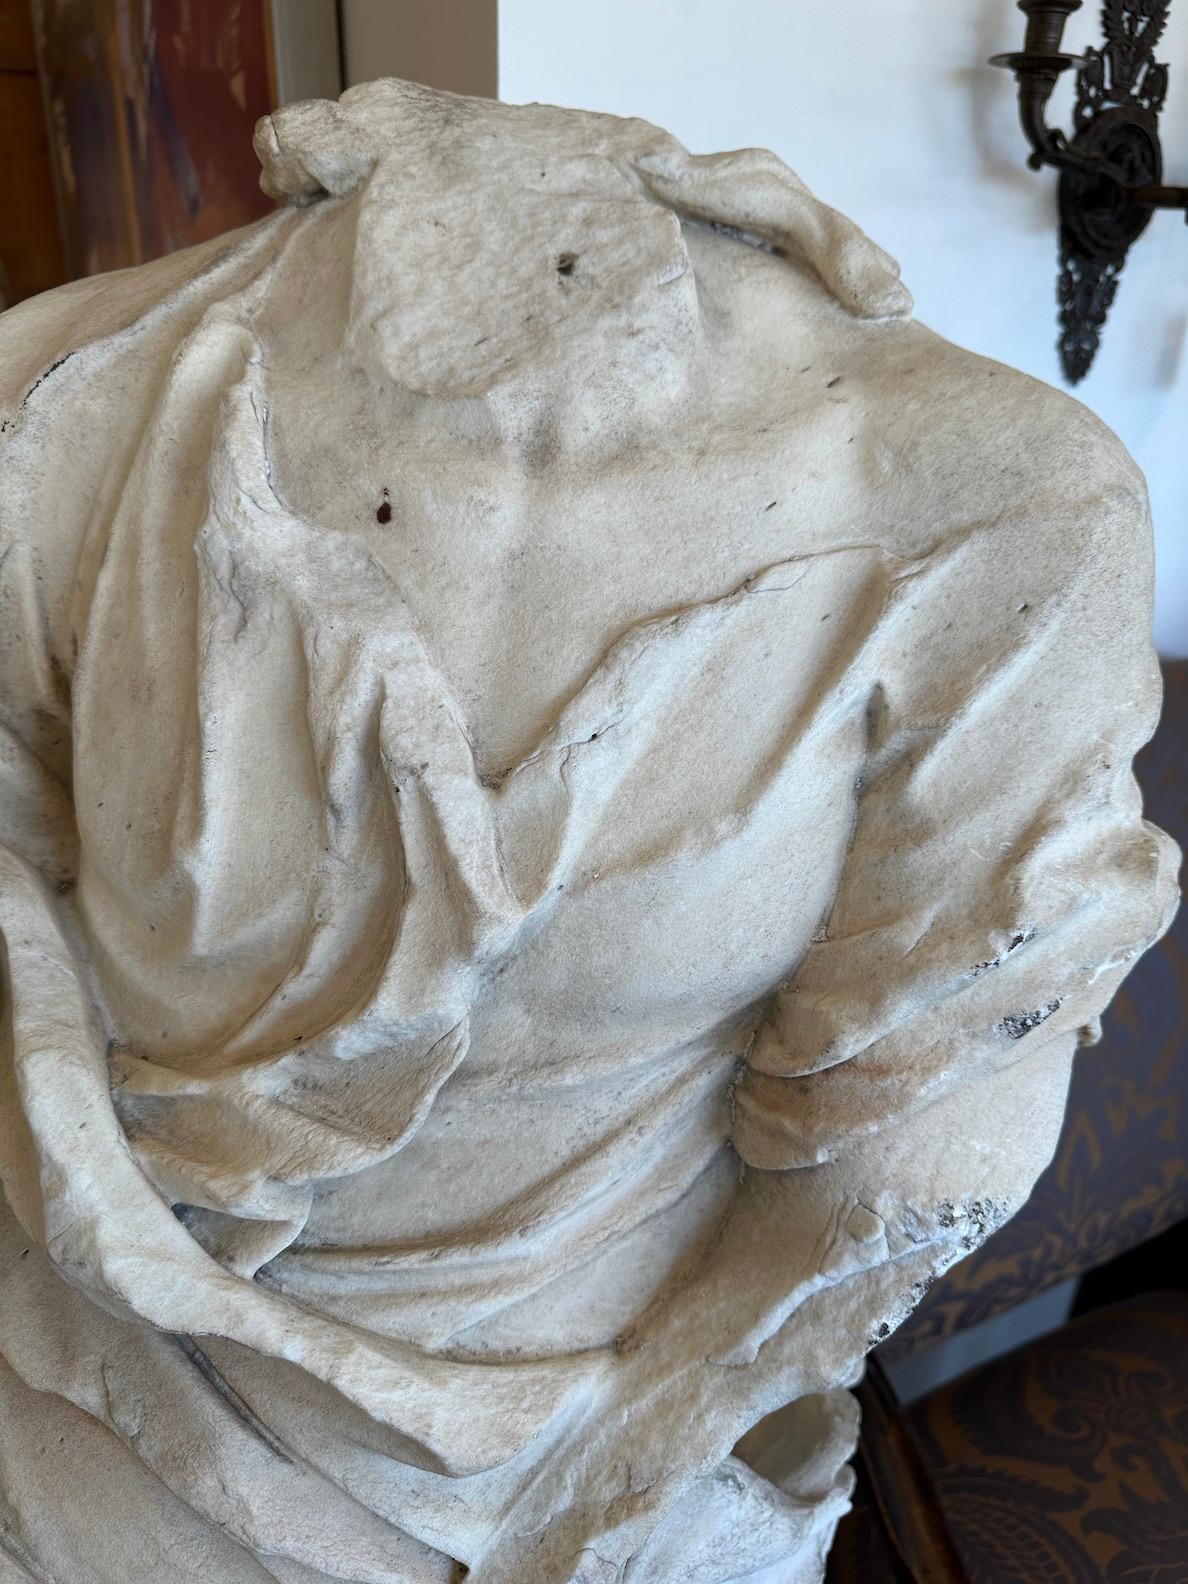 An extraordinary 17th century, hand-carved, solid Carrara marble, life sized figure fragment on raised base of the same. The subject is swaddled in a luxurious, gathered robe and tunic and features the remains of long, cascading tendrils of hair.